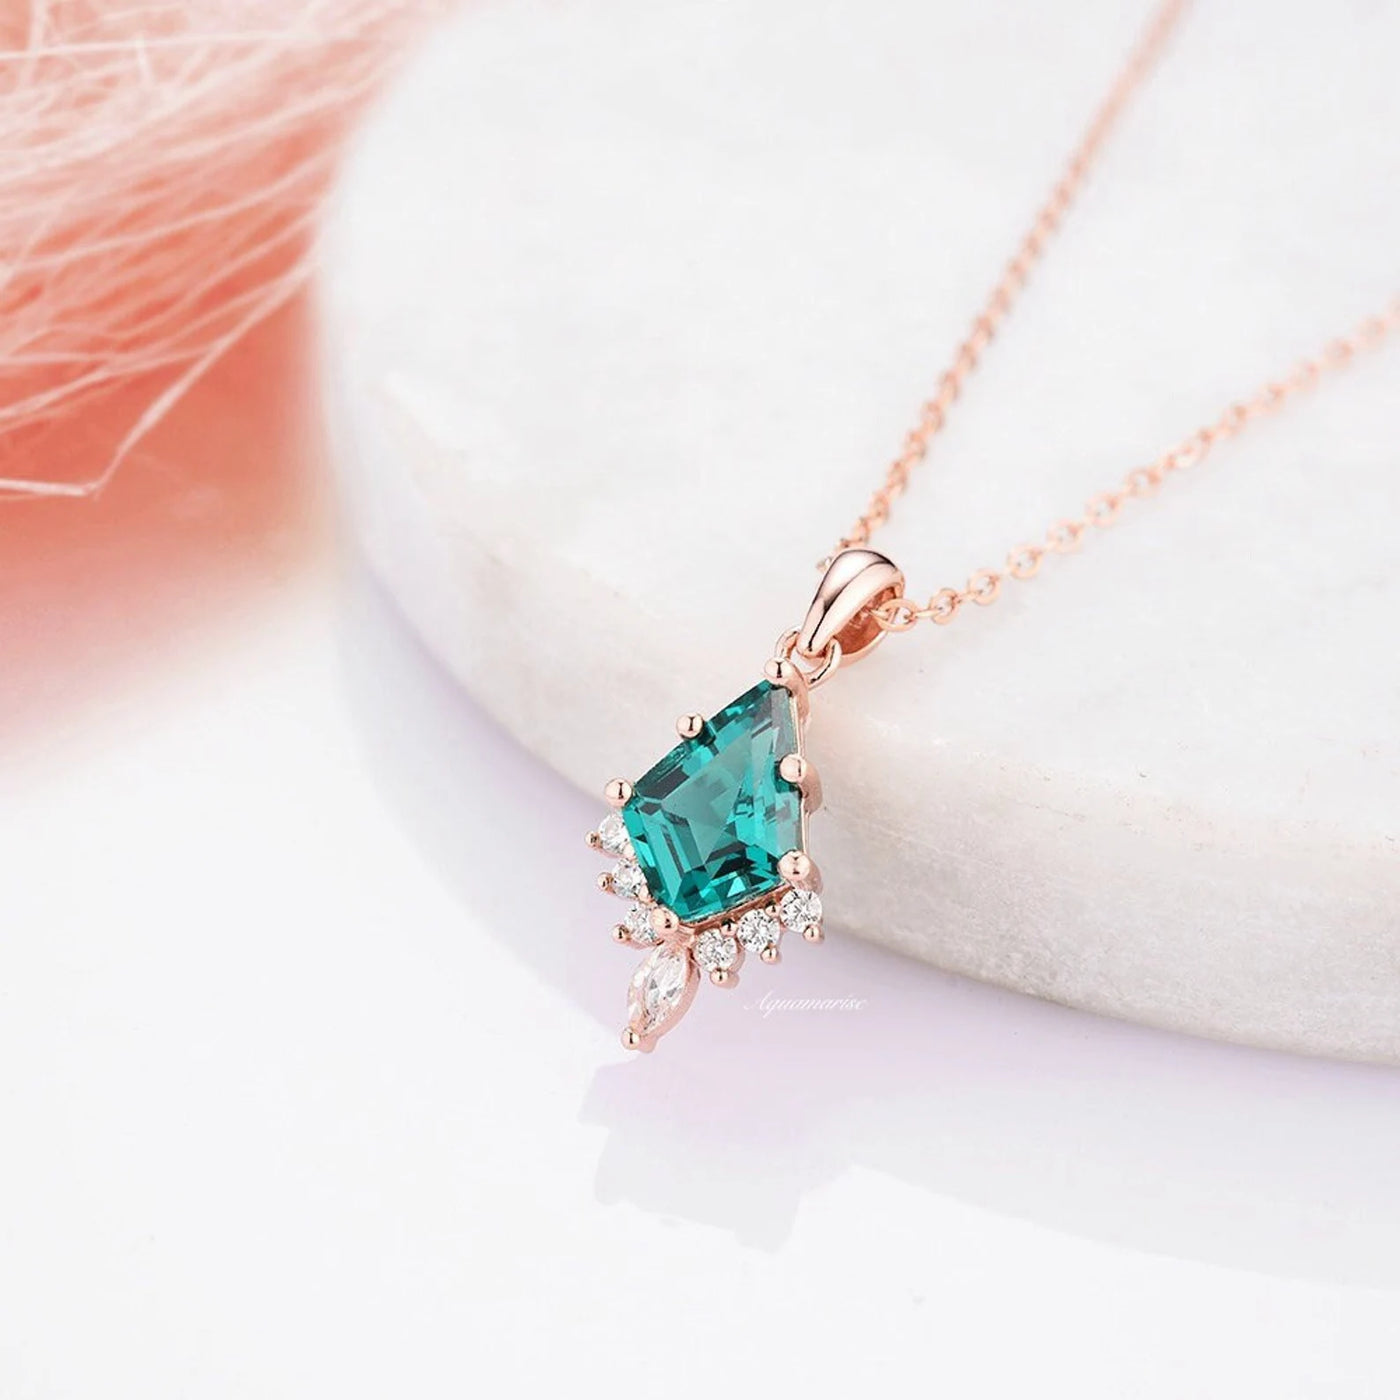 Skye Kite Emerald Necklace For Women- 14K Rose Gold Vermeil Dainty Pendant Necklace Birthstone Geometric Necklace- Anniversary Gift For Her